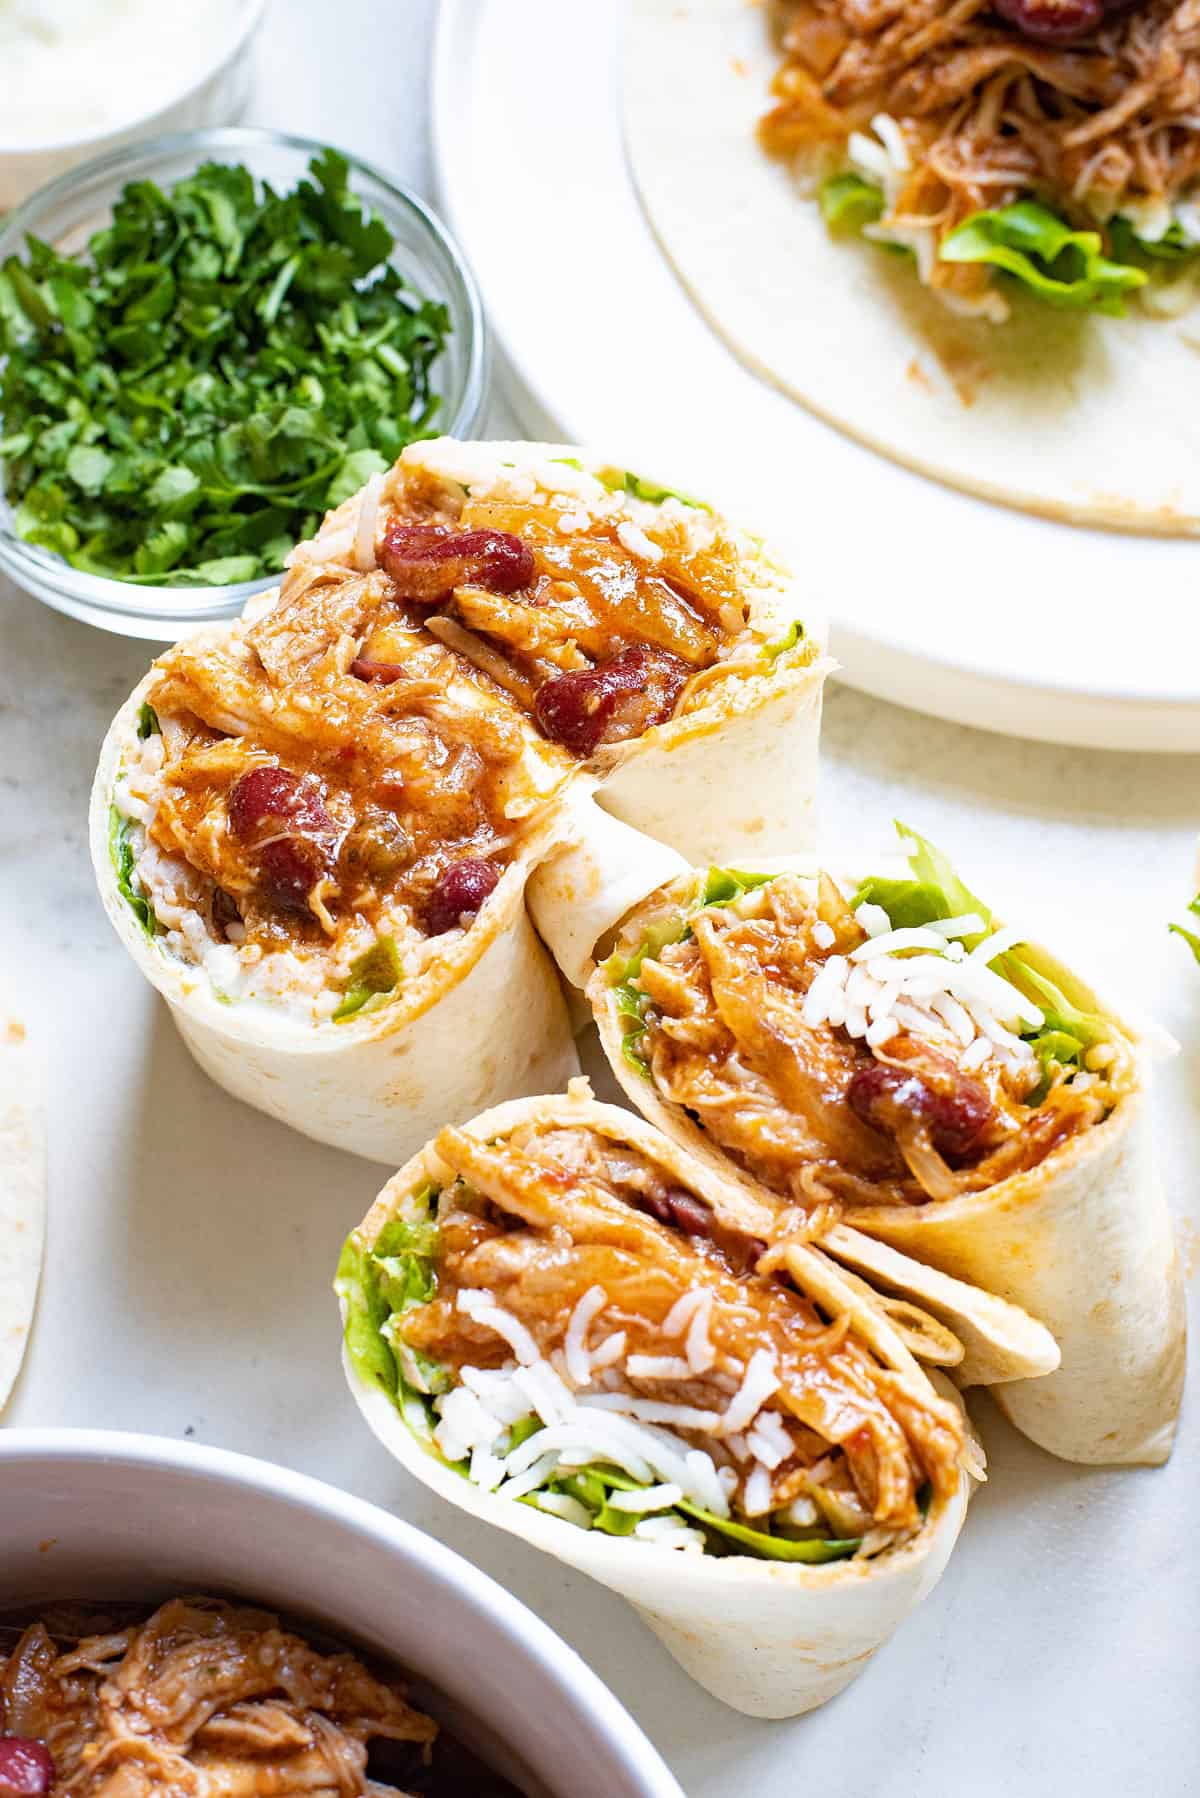 Additional Burrito Topping Ideas